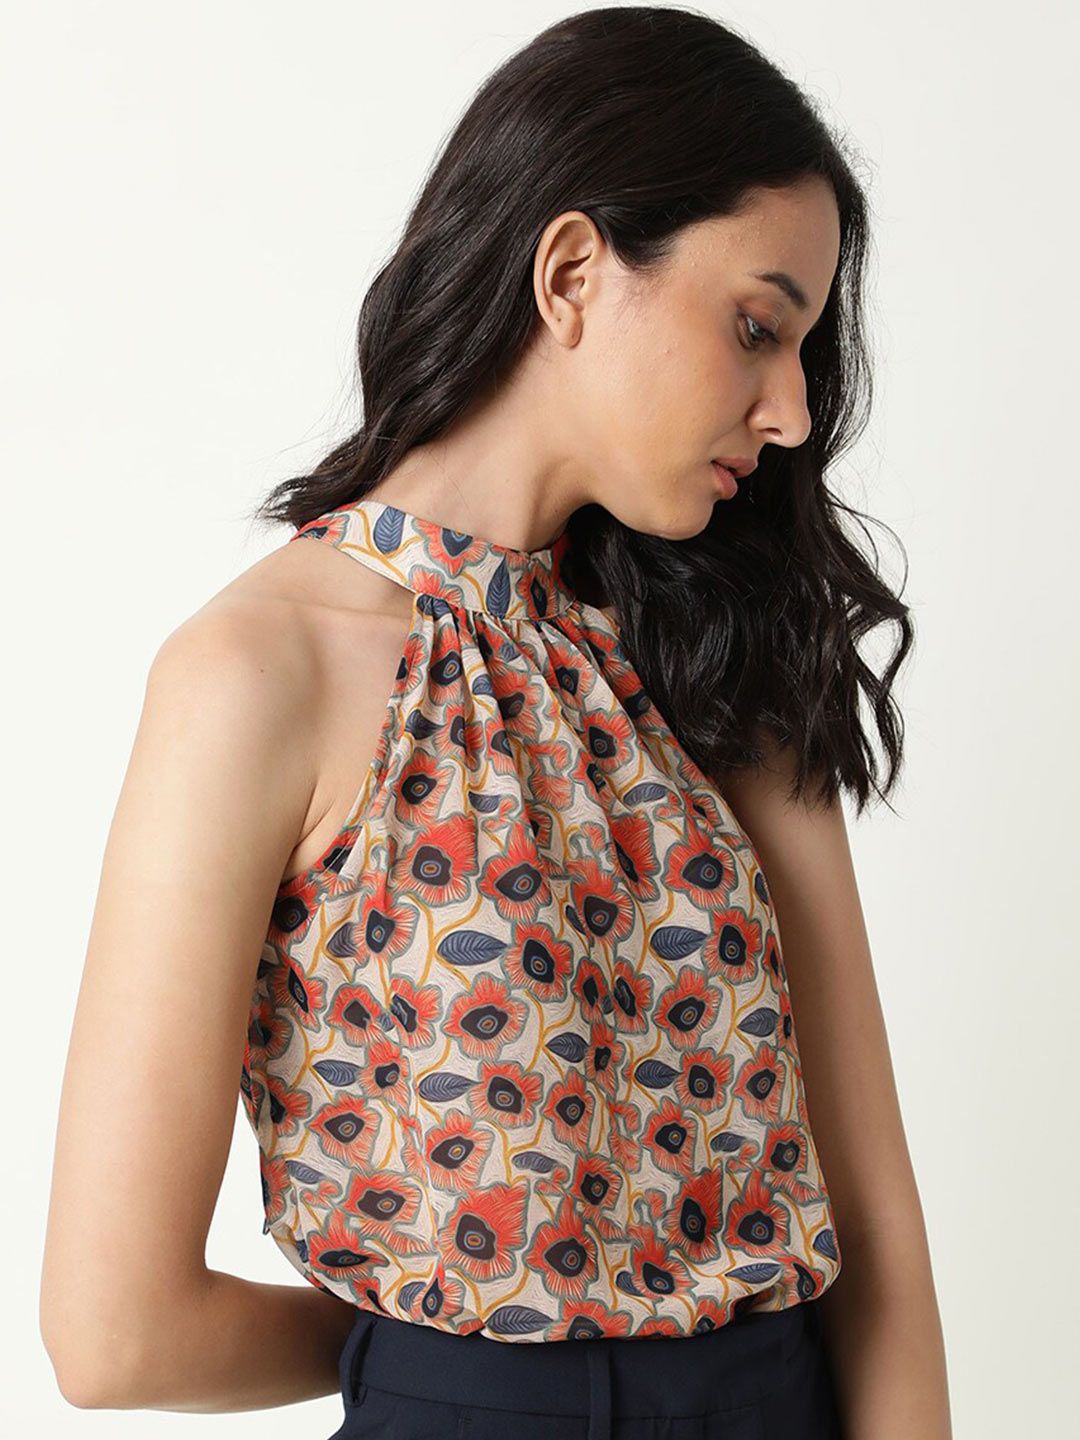 RAREISM Beige & Red Floral Print Choker Neck Top Price in India